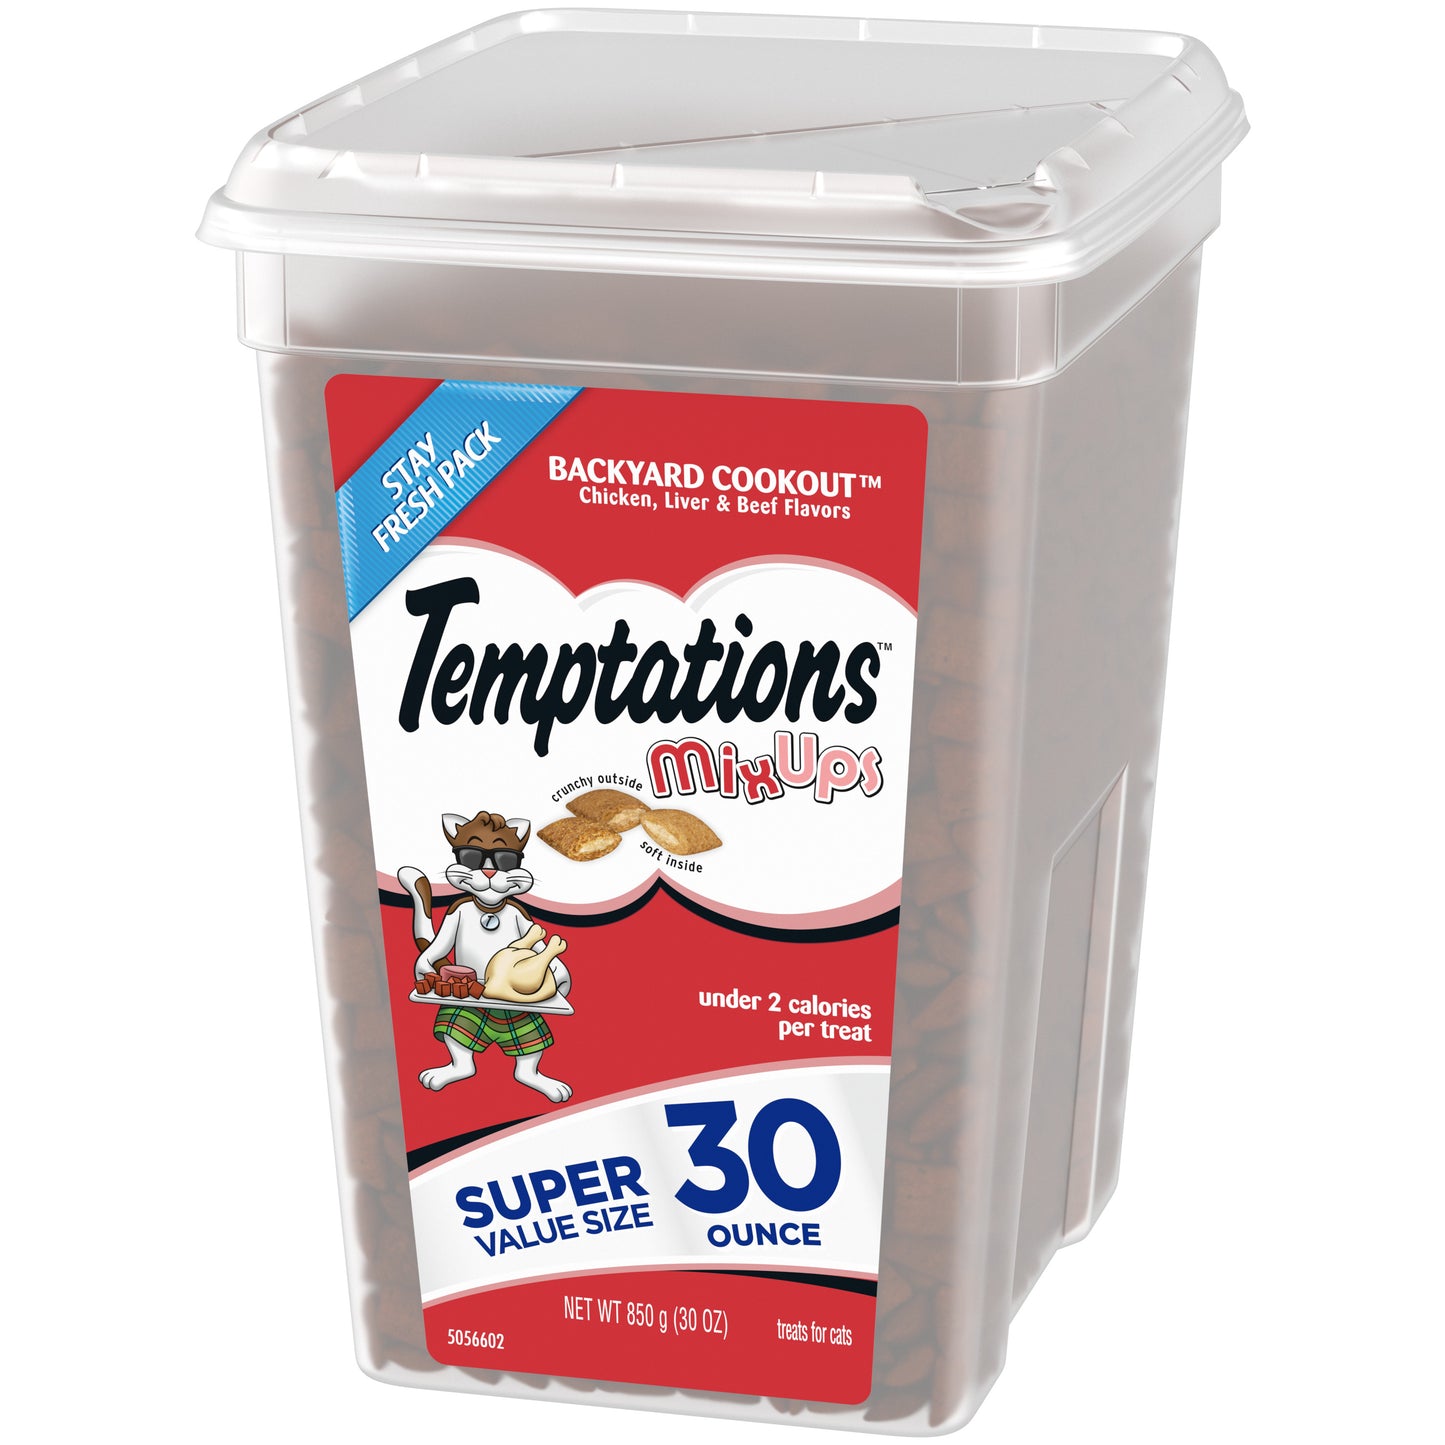 [Temptations][TEMPTATIONS MIXUPS Crunchy and Soft Cat Treats Backyard Cookout Flavor, 30 oz. Tub][Image Center Right (3/4 Angle)]